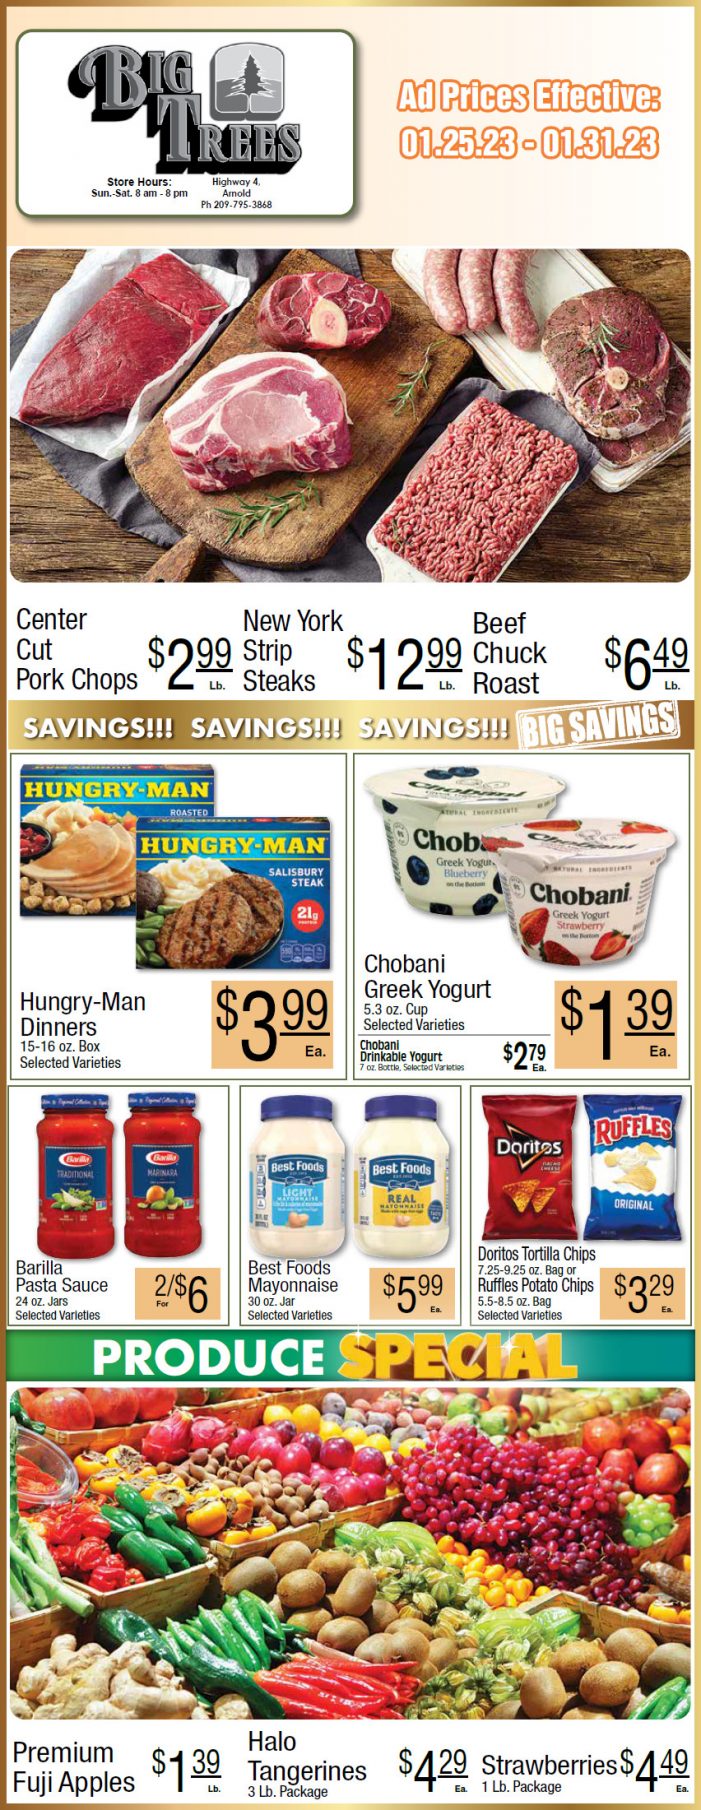 Big Trees Market Weekly Ad & Grocery Specials January 25 – 31st!  Shop Local & Save!!